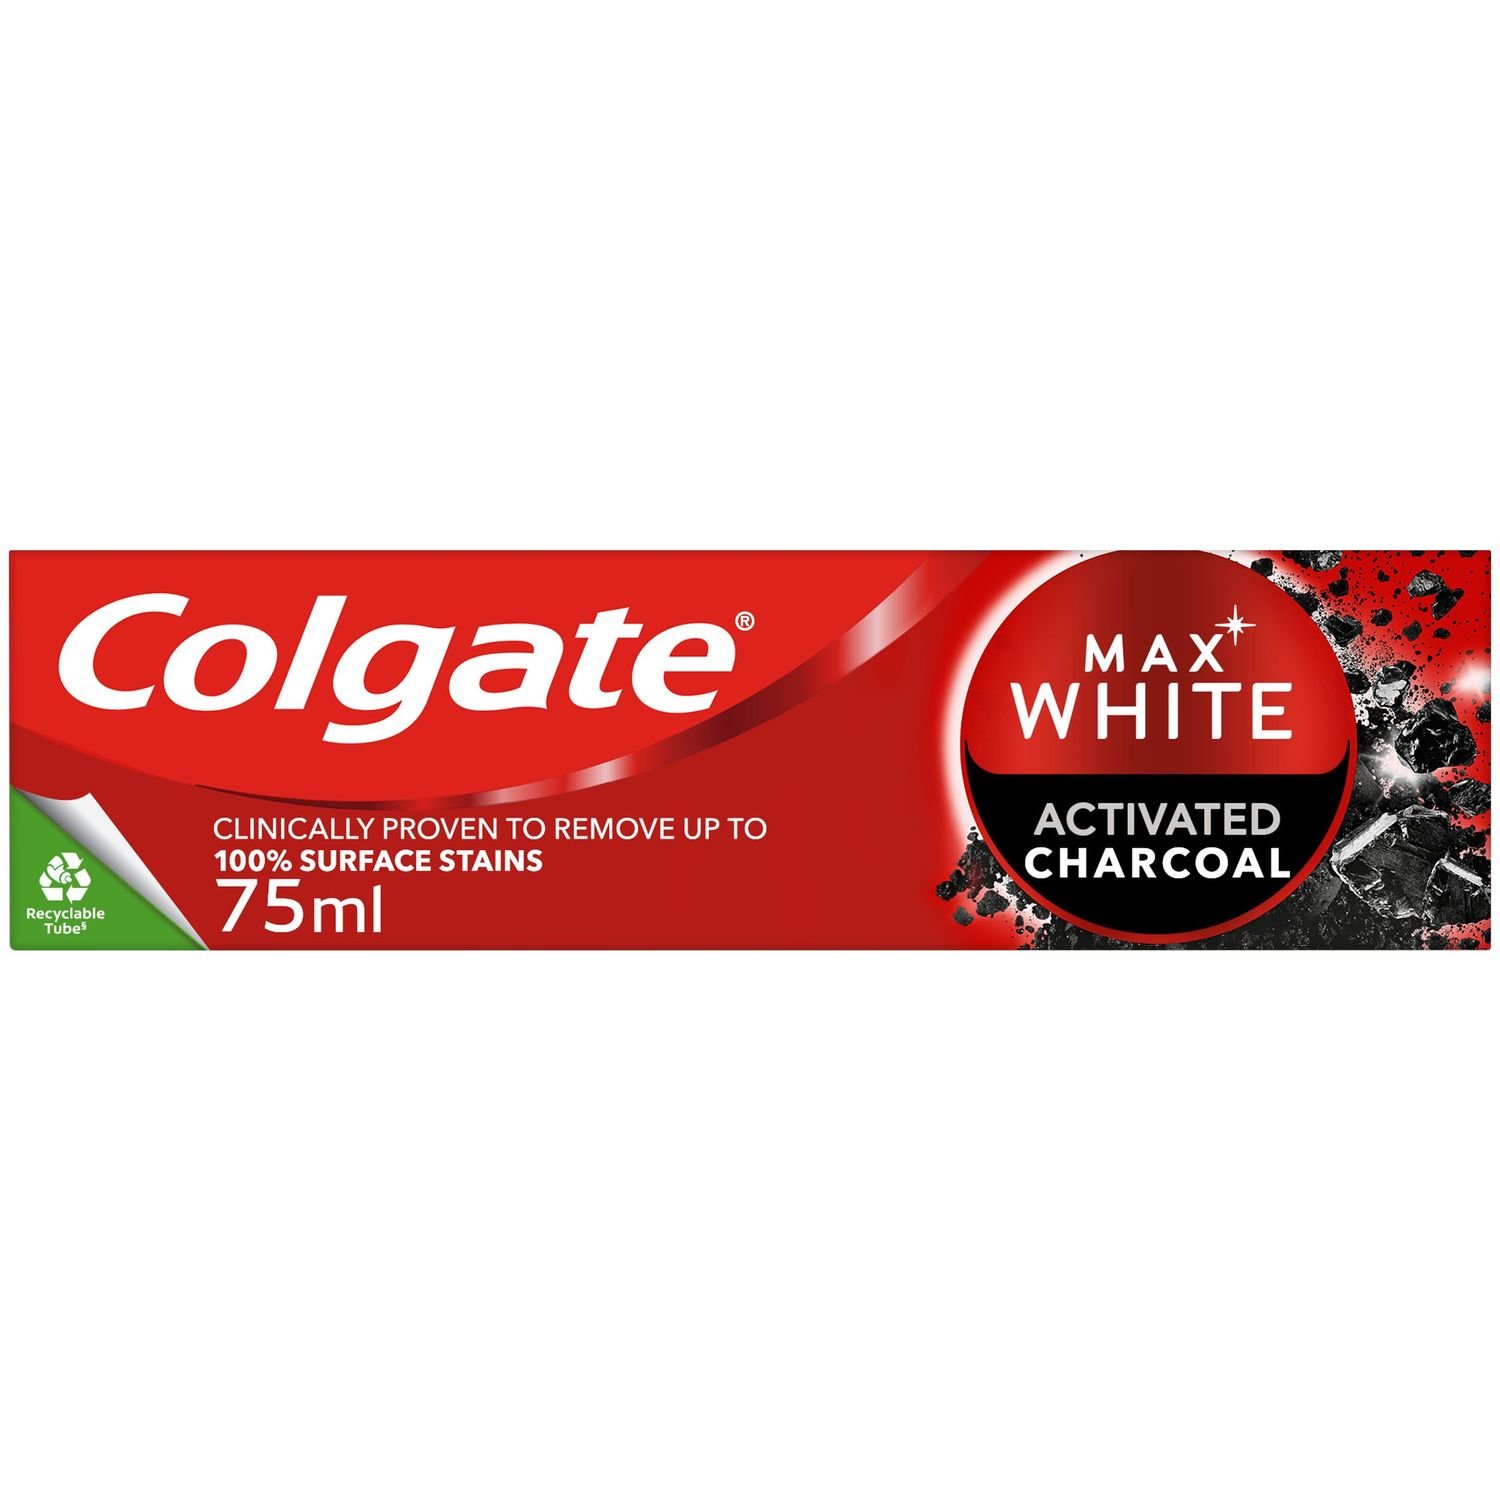 Зубна паста Colgate Max White Activated Charcoal 75 мл - фото 4